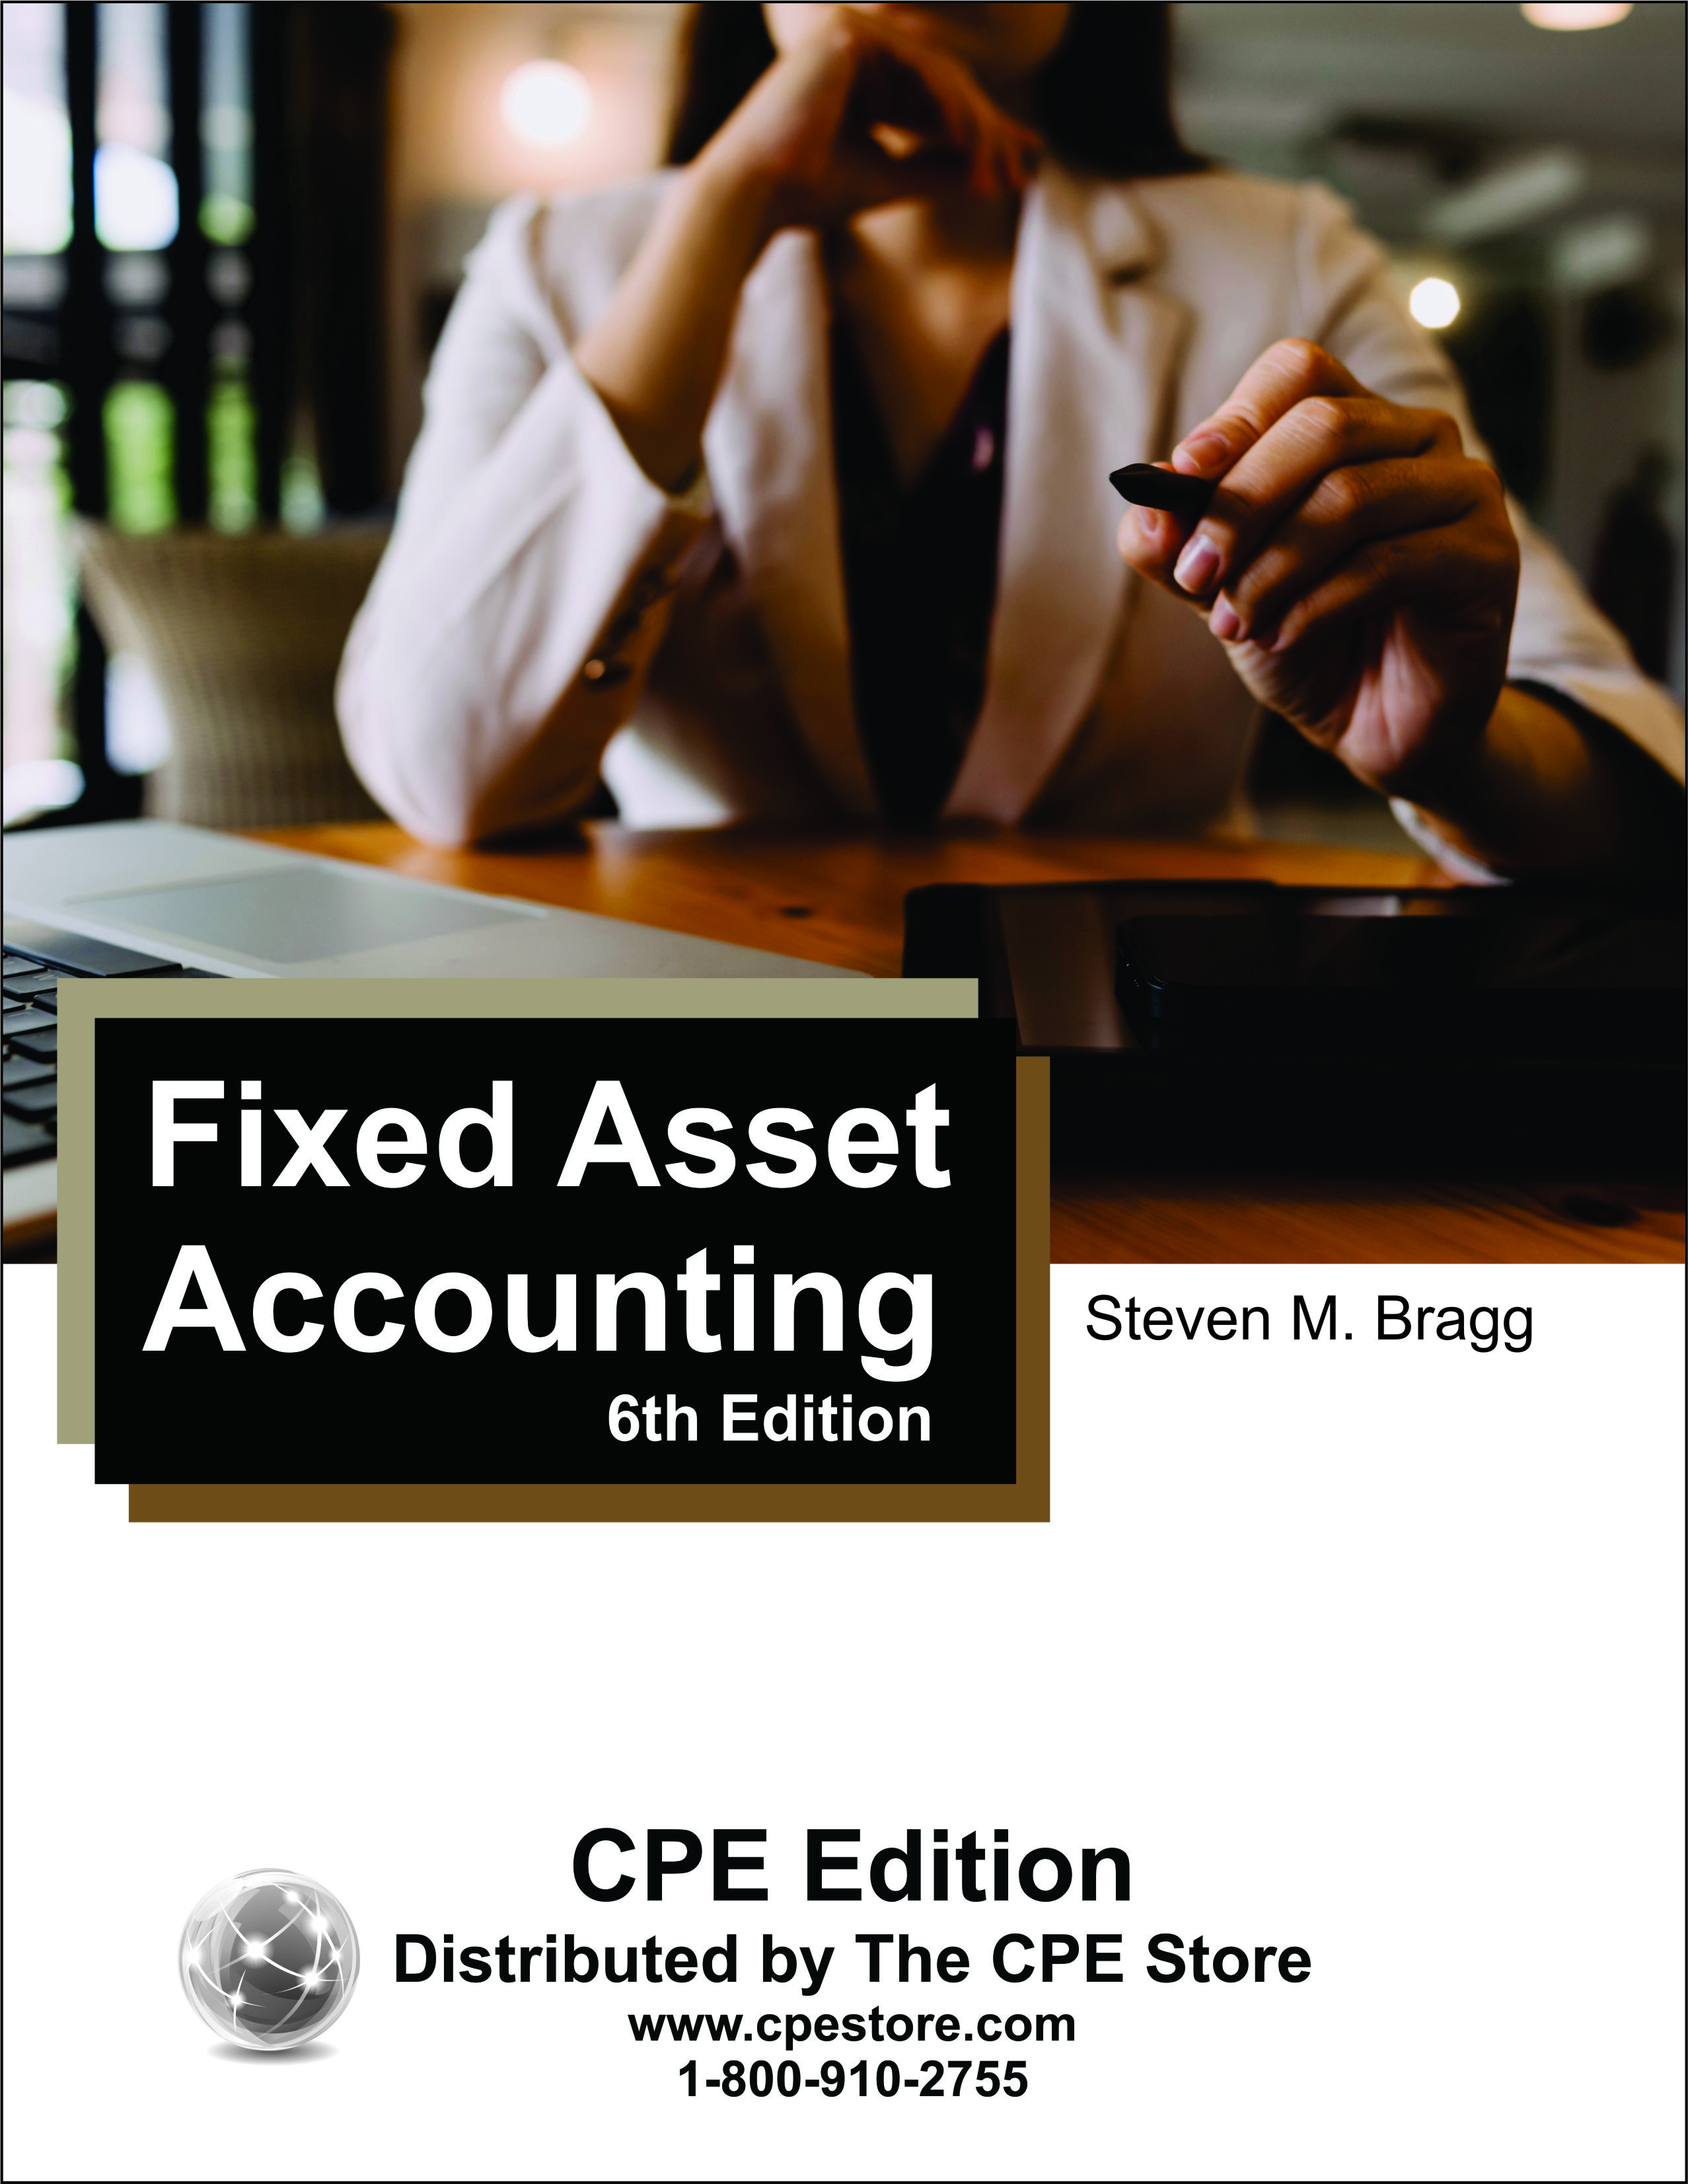 Fixed Asset Accounting